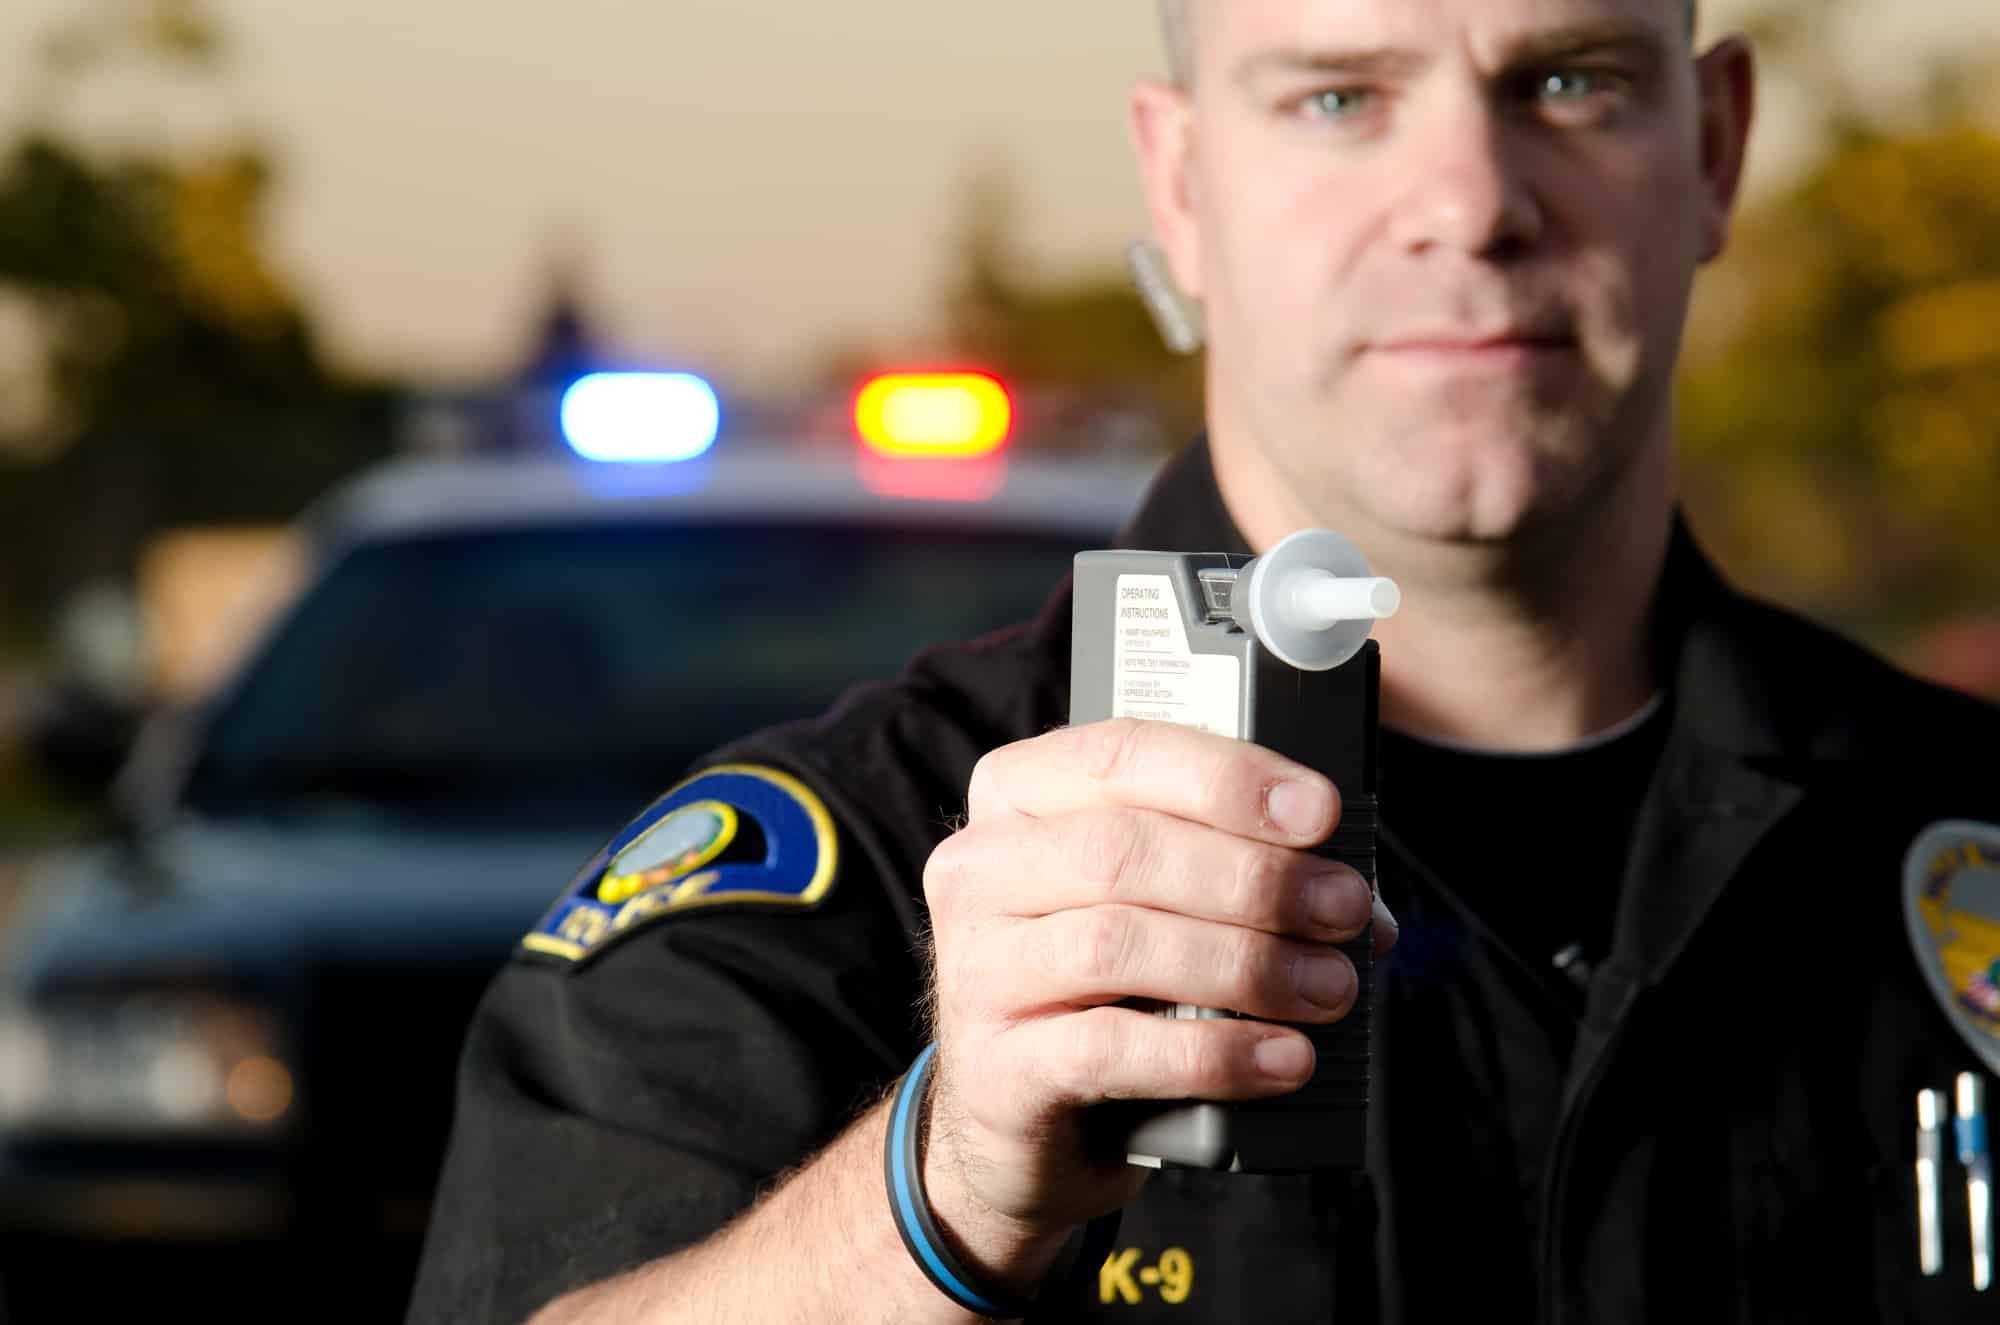 A police officer administers a breathalyzer sobriety test.